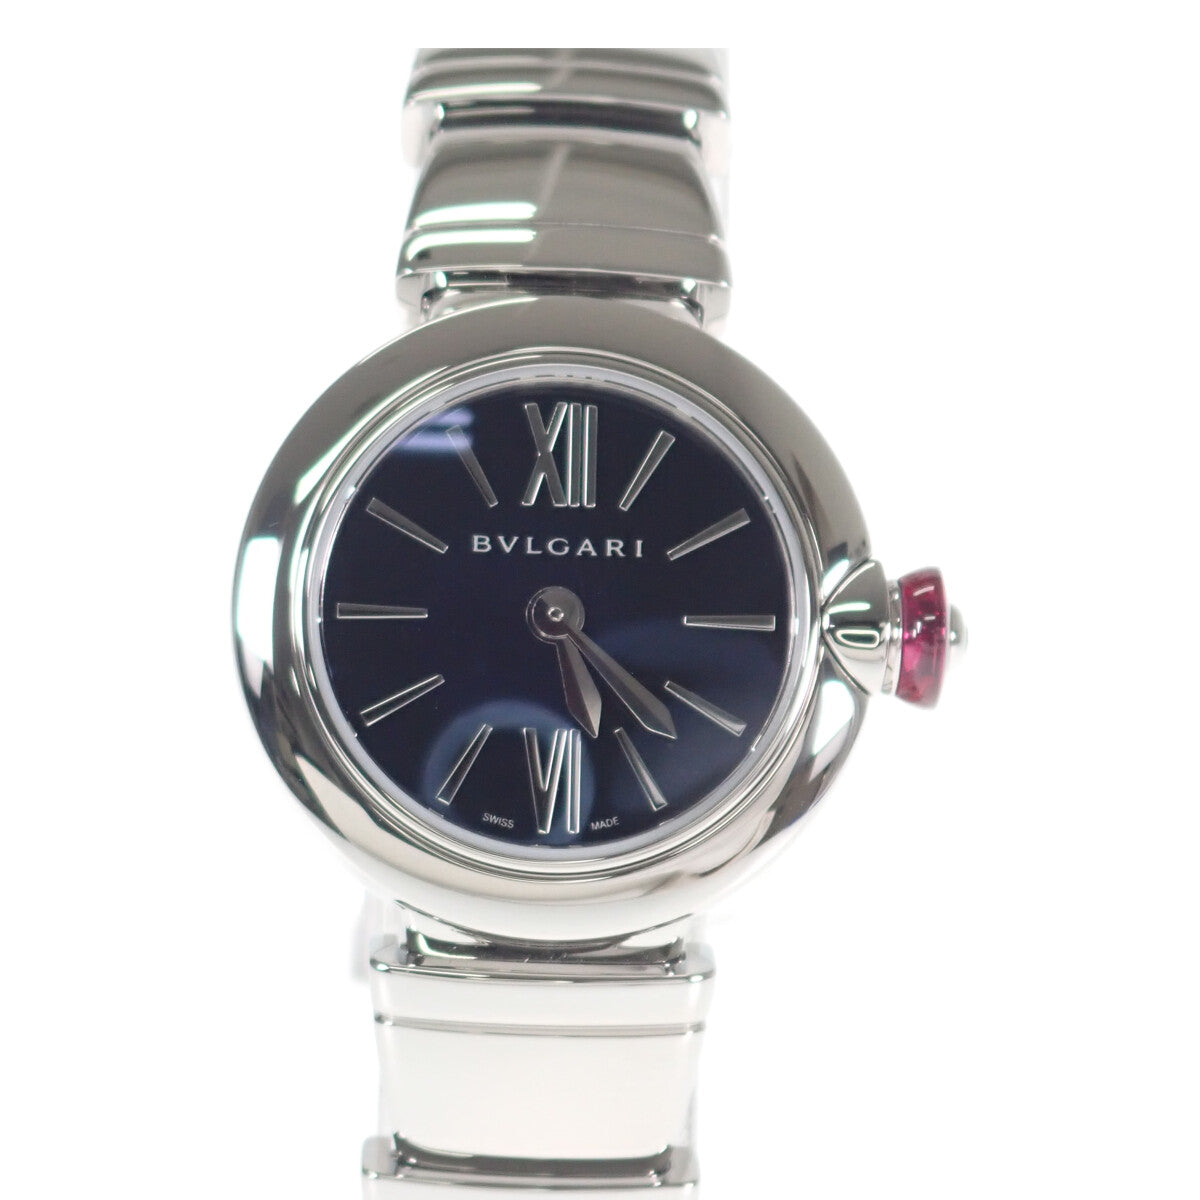 Bvlgari  Bulgari Women's BVLGARI Piccola Lucea Watch LU23BSS in Stainless Steel, Silver (Pre-owned) LU23BSS in Excellent condition